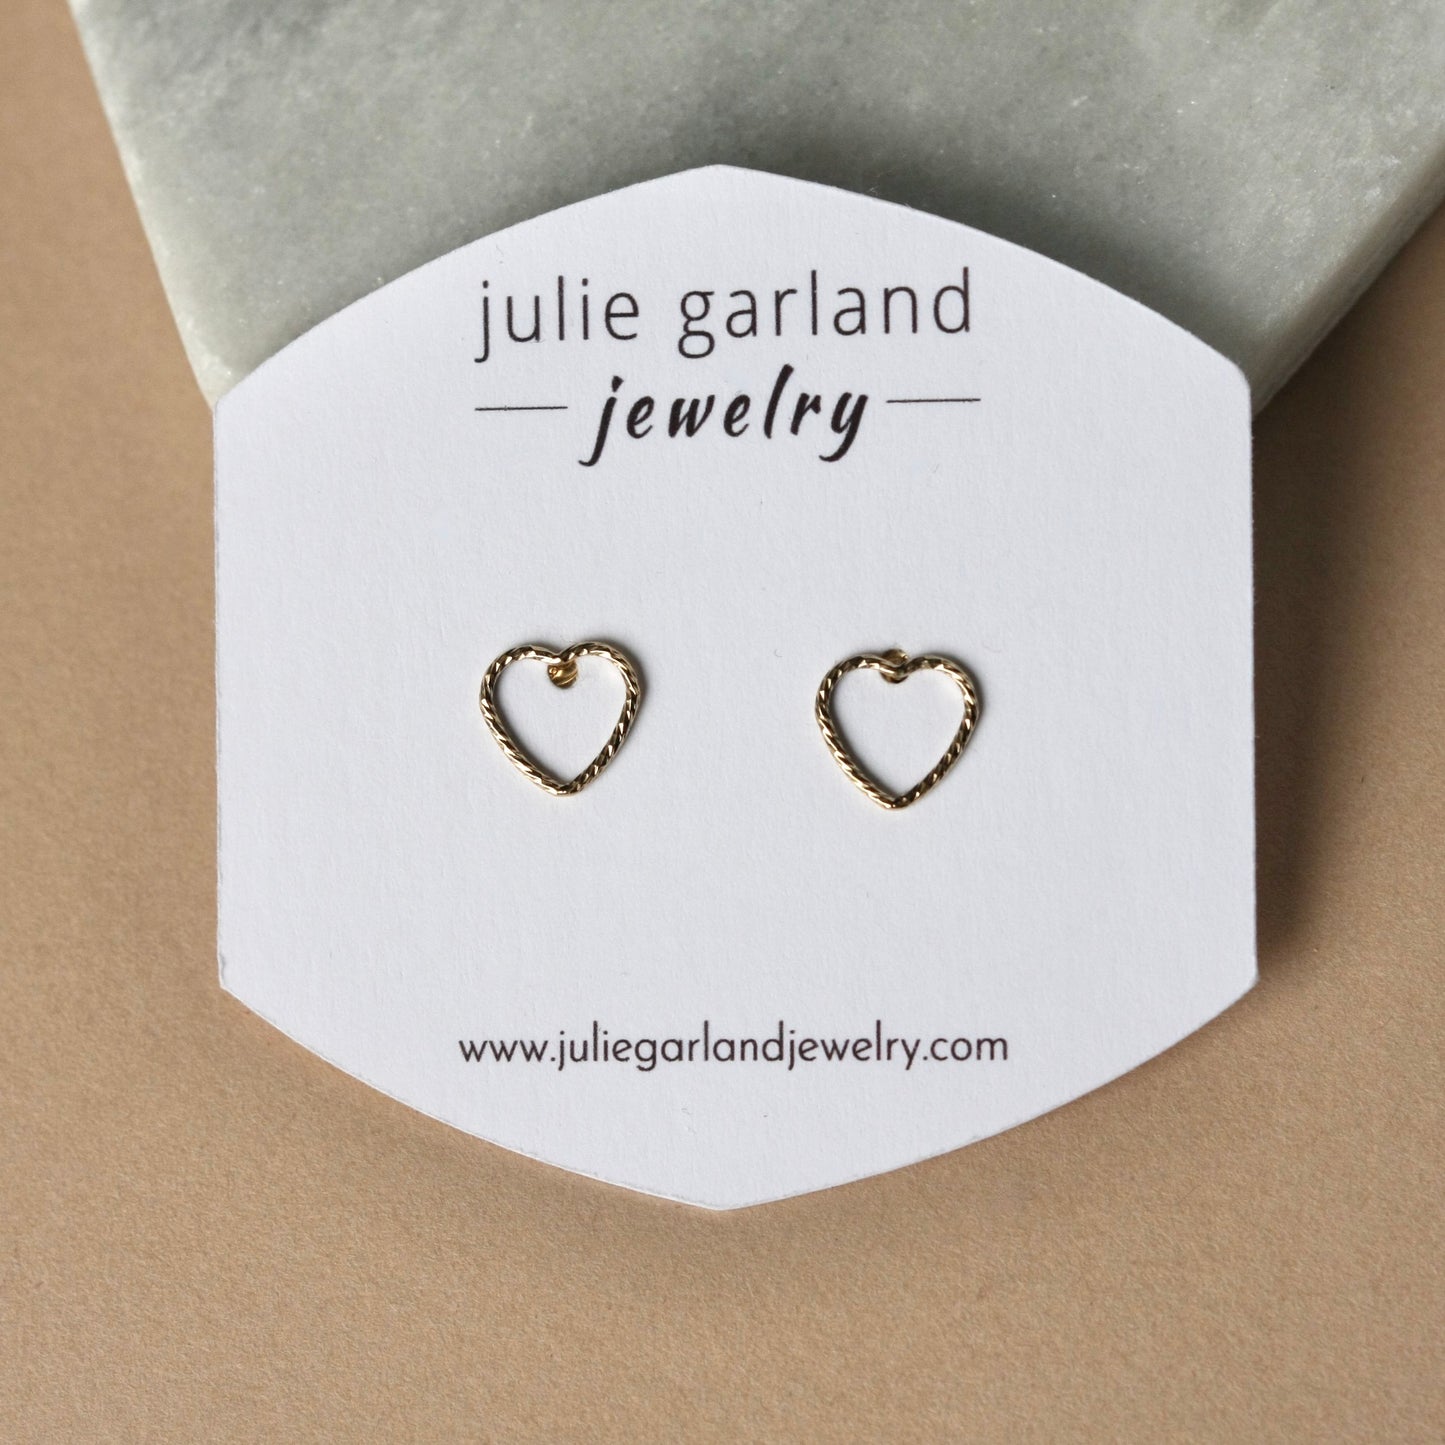 Sparkly Gold Heart Stud Earrings